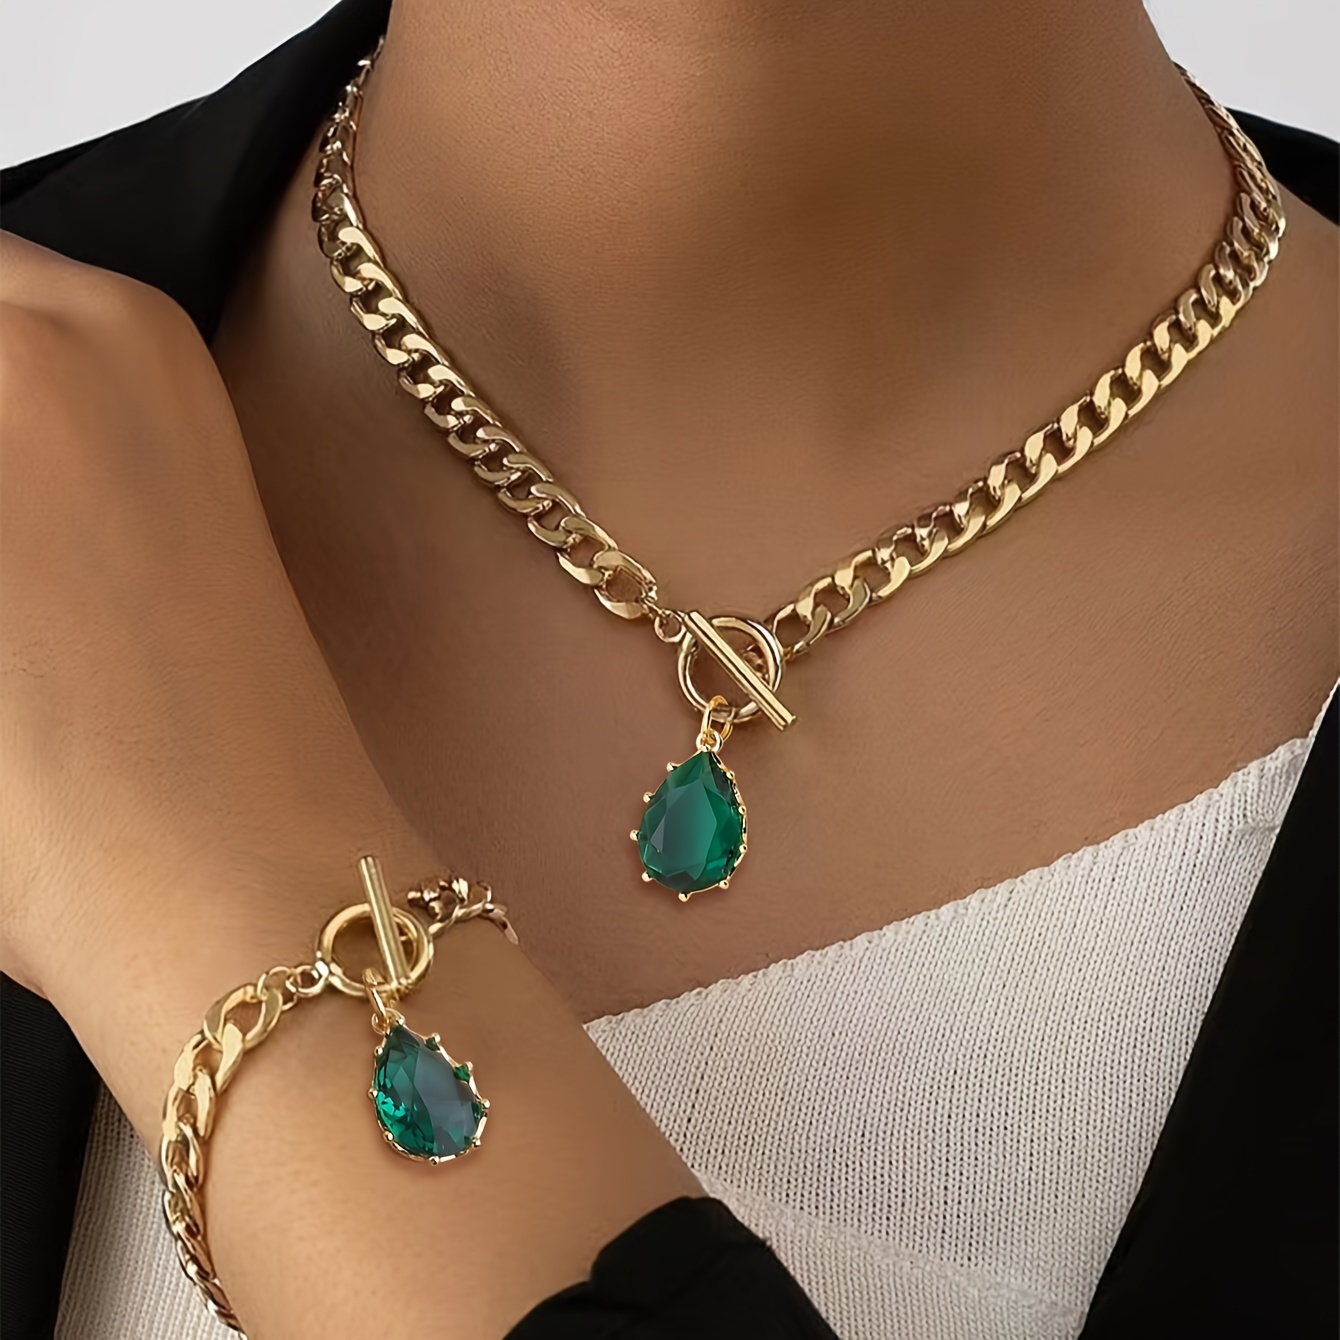 

Bracelet + Necklace Vintage Jewelry Set Ot Buckle + Chain Design Inlaid Emerald Zirconia In Waterdrop Shape Chic And Cheap Thing